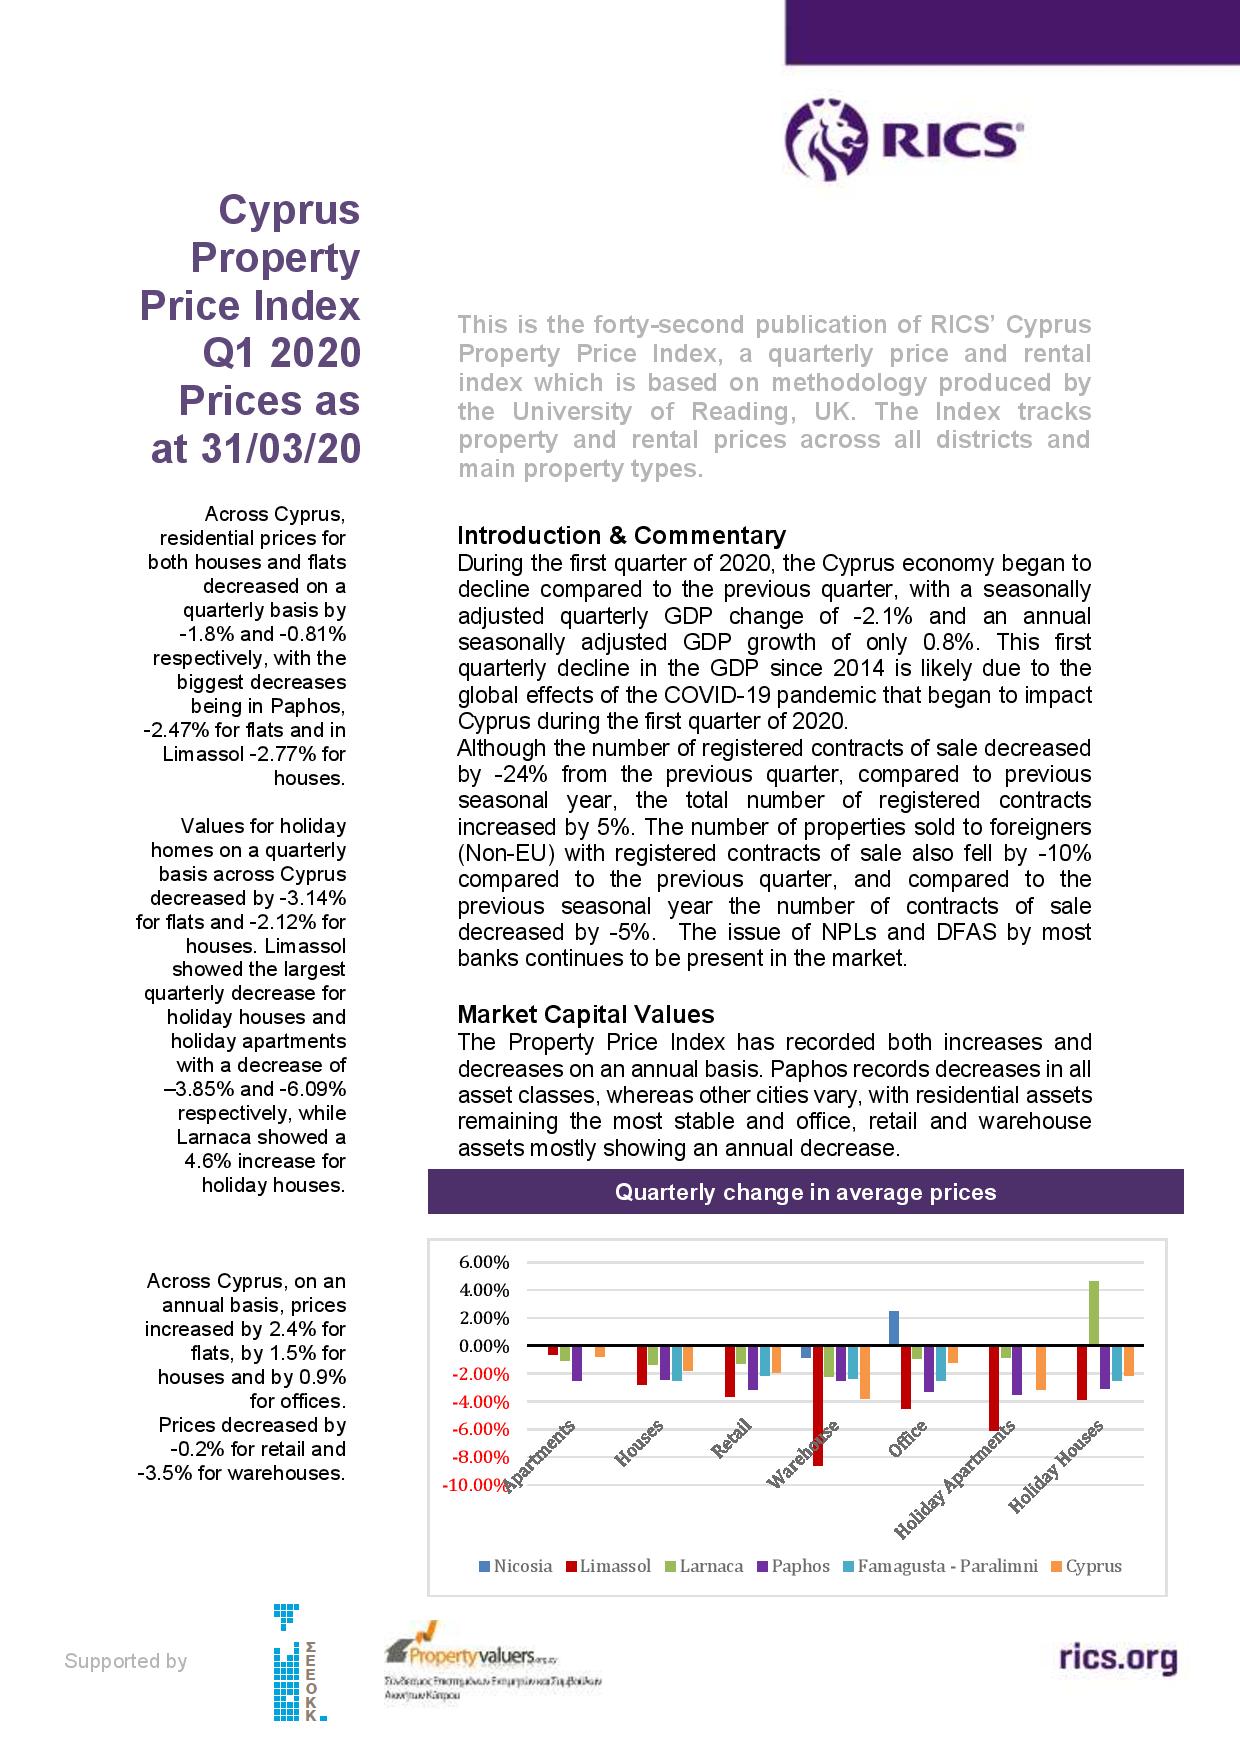 RICS: Cyprus Property Price Index Q1 2020 Prices as at 31/03/20